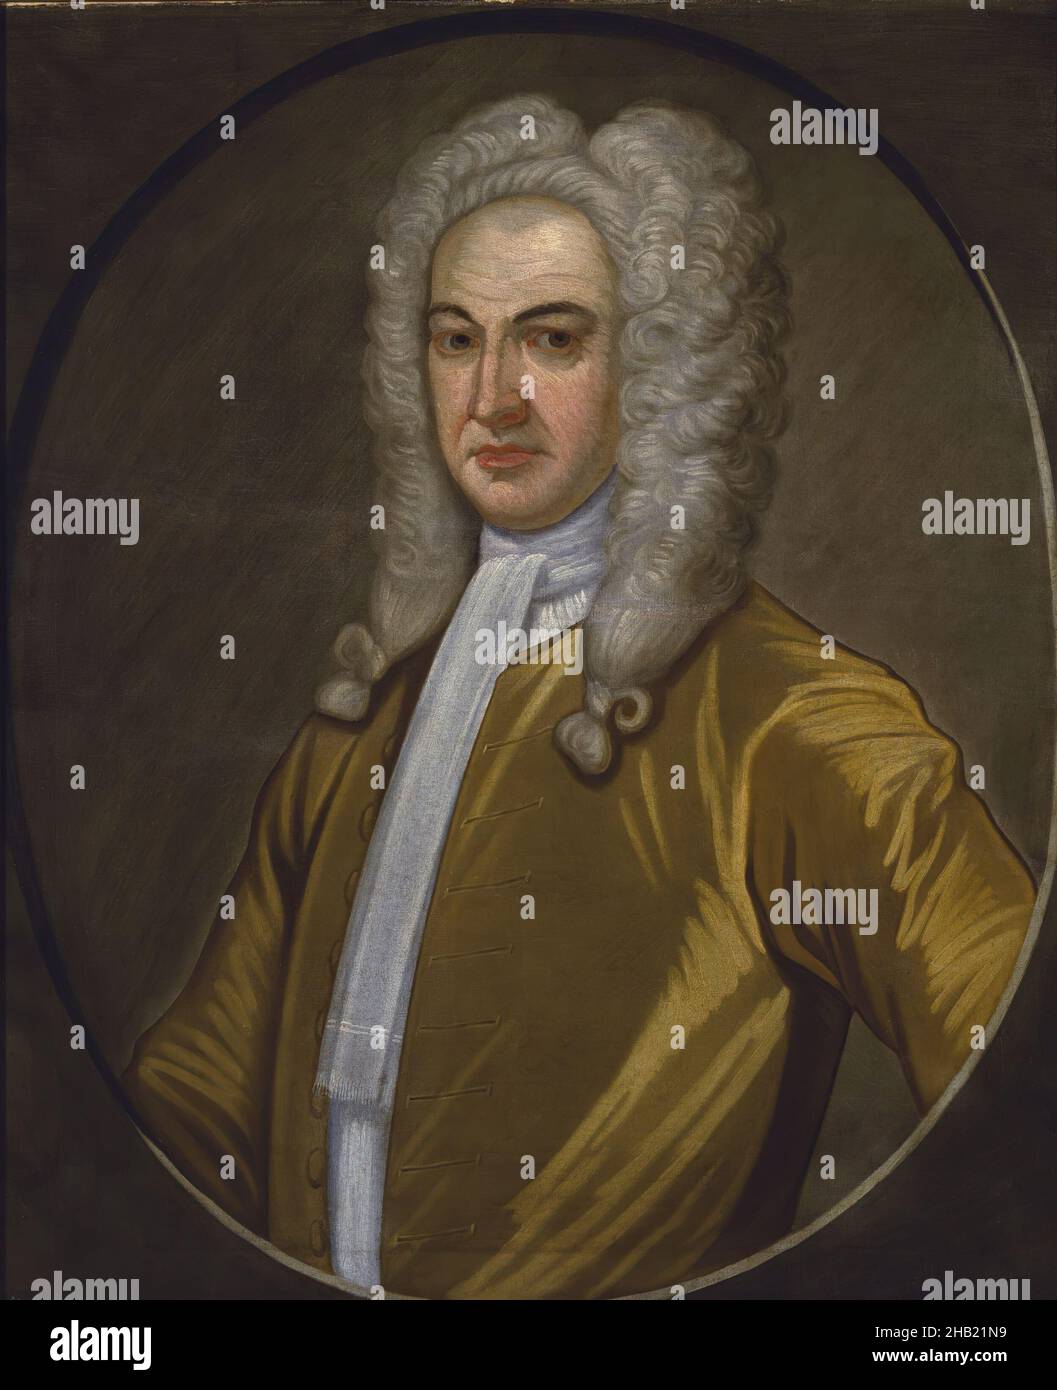 Governor Lewis Morris, John Watson, American, 1685-1768, Oil on linen, ca. 1726, 30 1/16 x 25 in., 76.3 x 63.5 cm, American Painting, British Governor, center part, Chief justice of New York, clothing, clothing for men, colonial, curly, elegant, elite, fashion, for, frown, Georgian period, governor, Governor Lewis Morris, history, landowner, leader, lifestyle, Lord of Morrisania, male figure, man, men, mens clothing, New Jersey, New Jersey History, oil on canvas, painting, political figure, politician, pompous, portrait, pre-Revolutionary, ruler, satin, scarf, scowl, US History, wealthy, wig Stock Photo